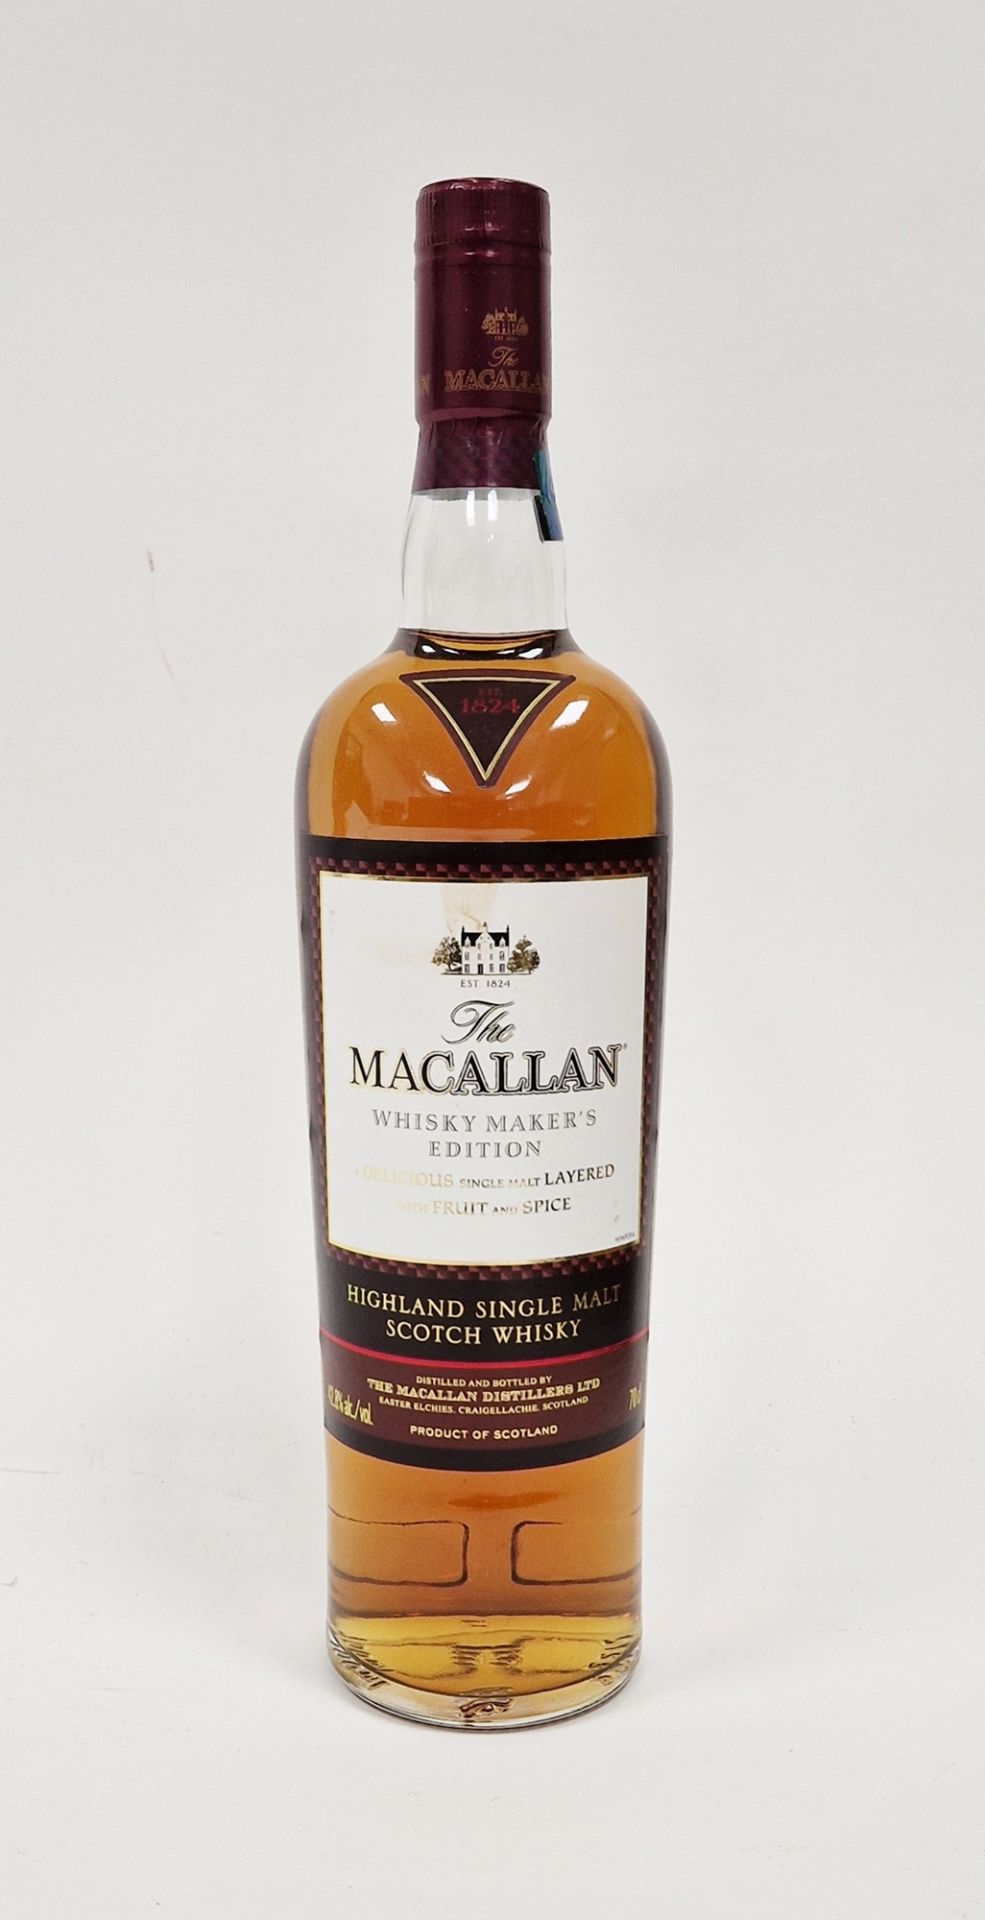 The Macallan whisky makers edition highland single malt Scotch Whisky, part of the 1824